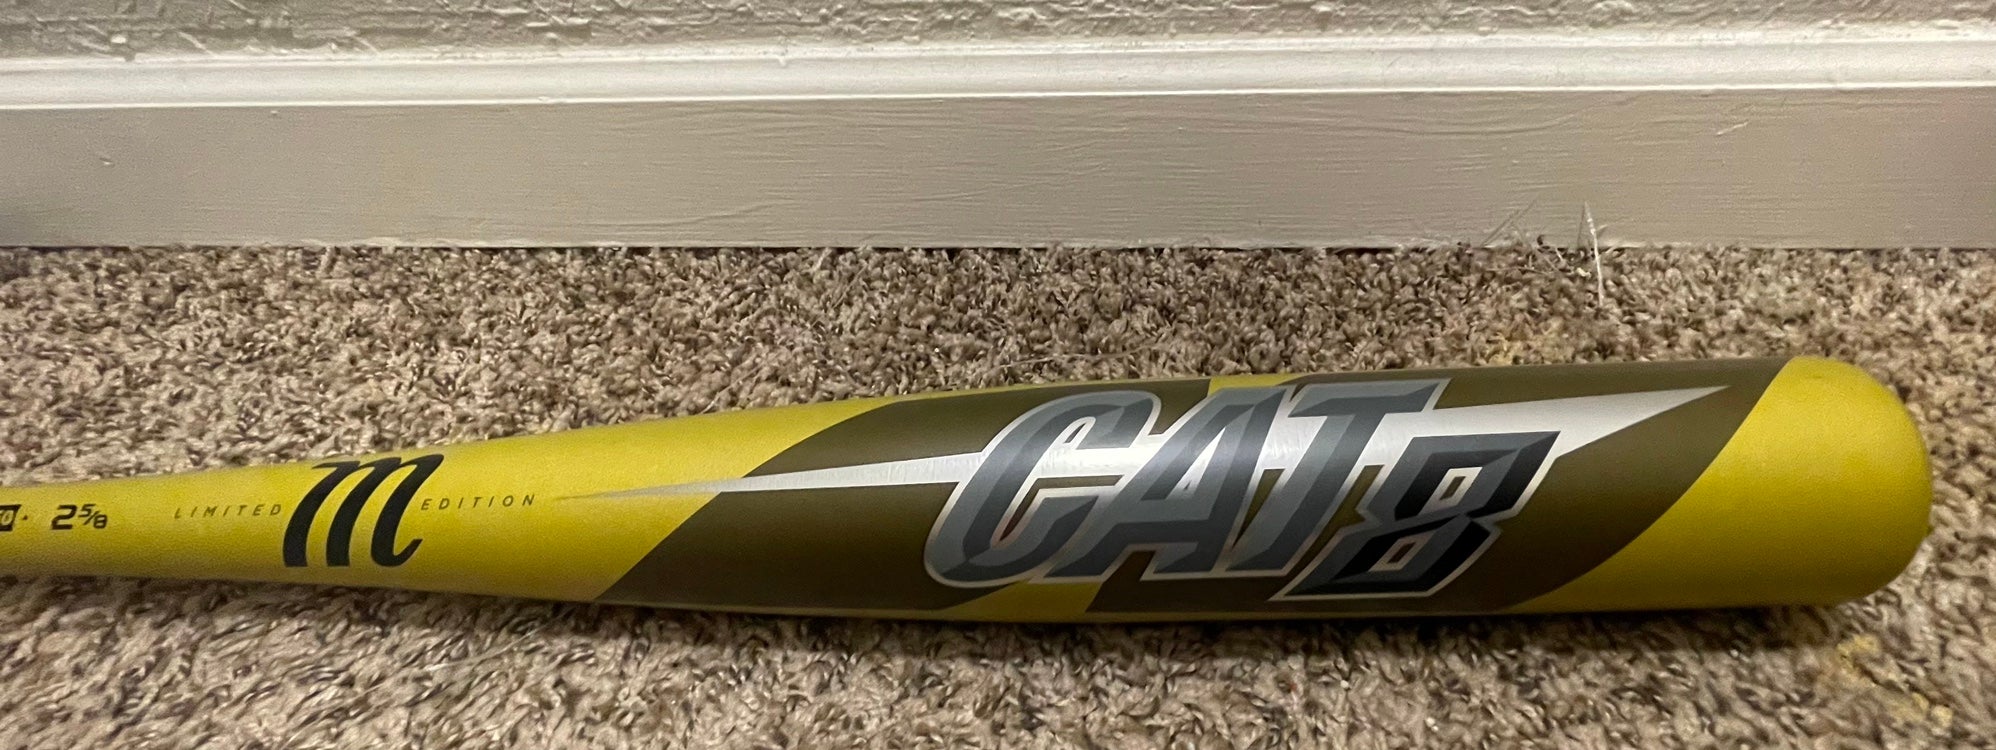 Marucci Cat8 Baseball Bat Size 33 In / 30 oz BBCOR New – Replays Sports  Exchange